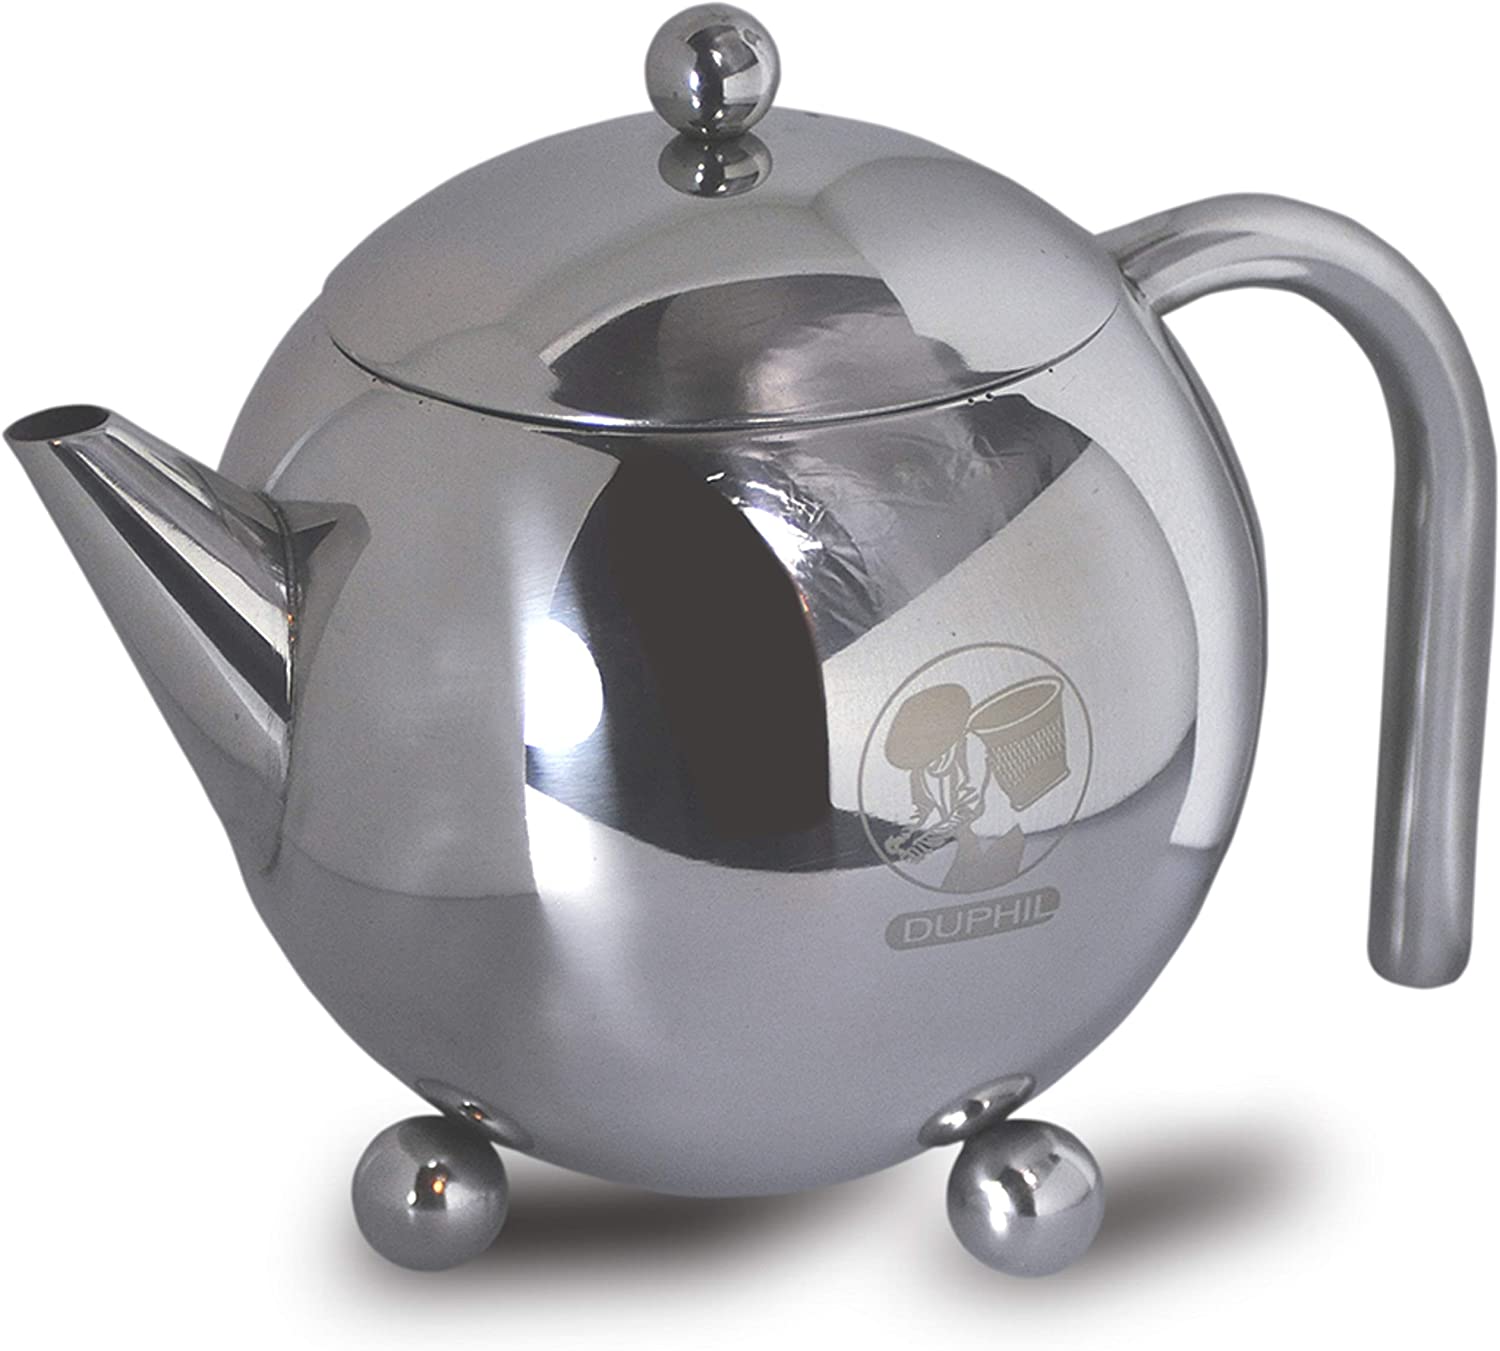 Duphil Teapot made of stainless steel with sieve insert, 0.7 litre capacity.